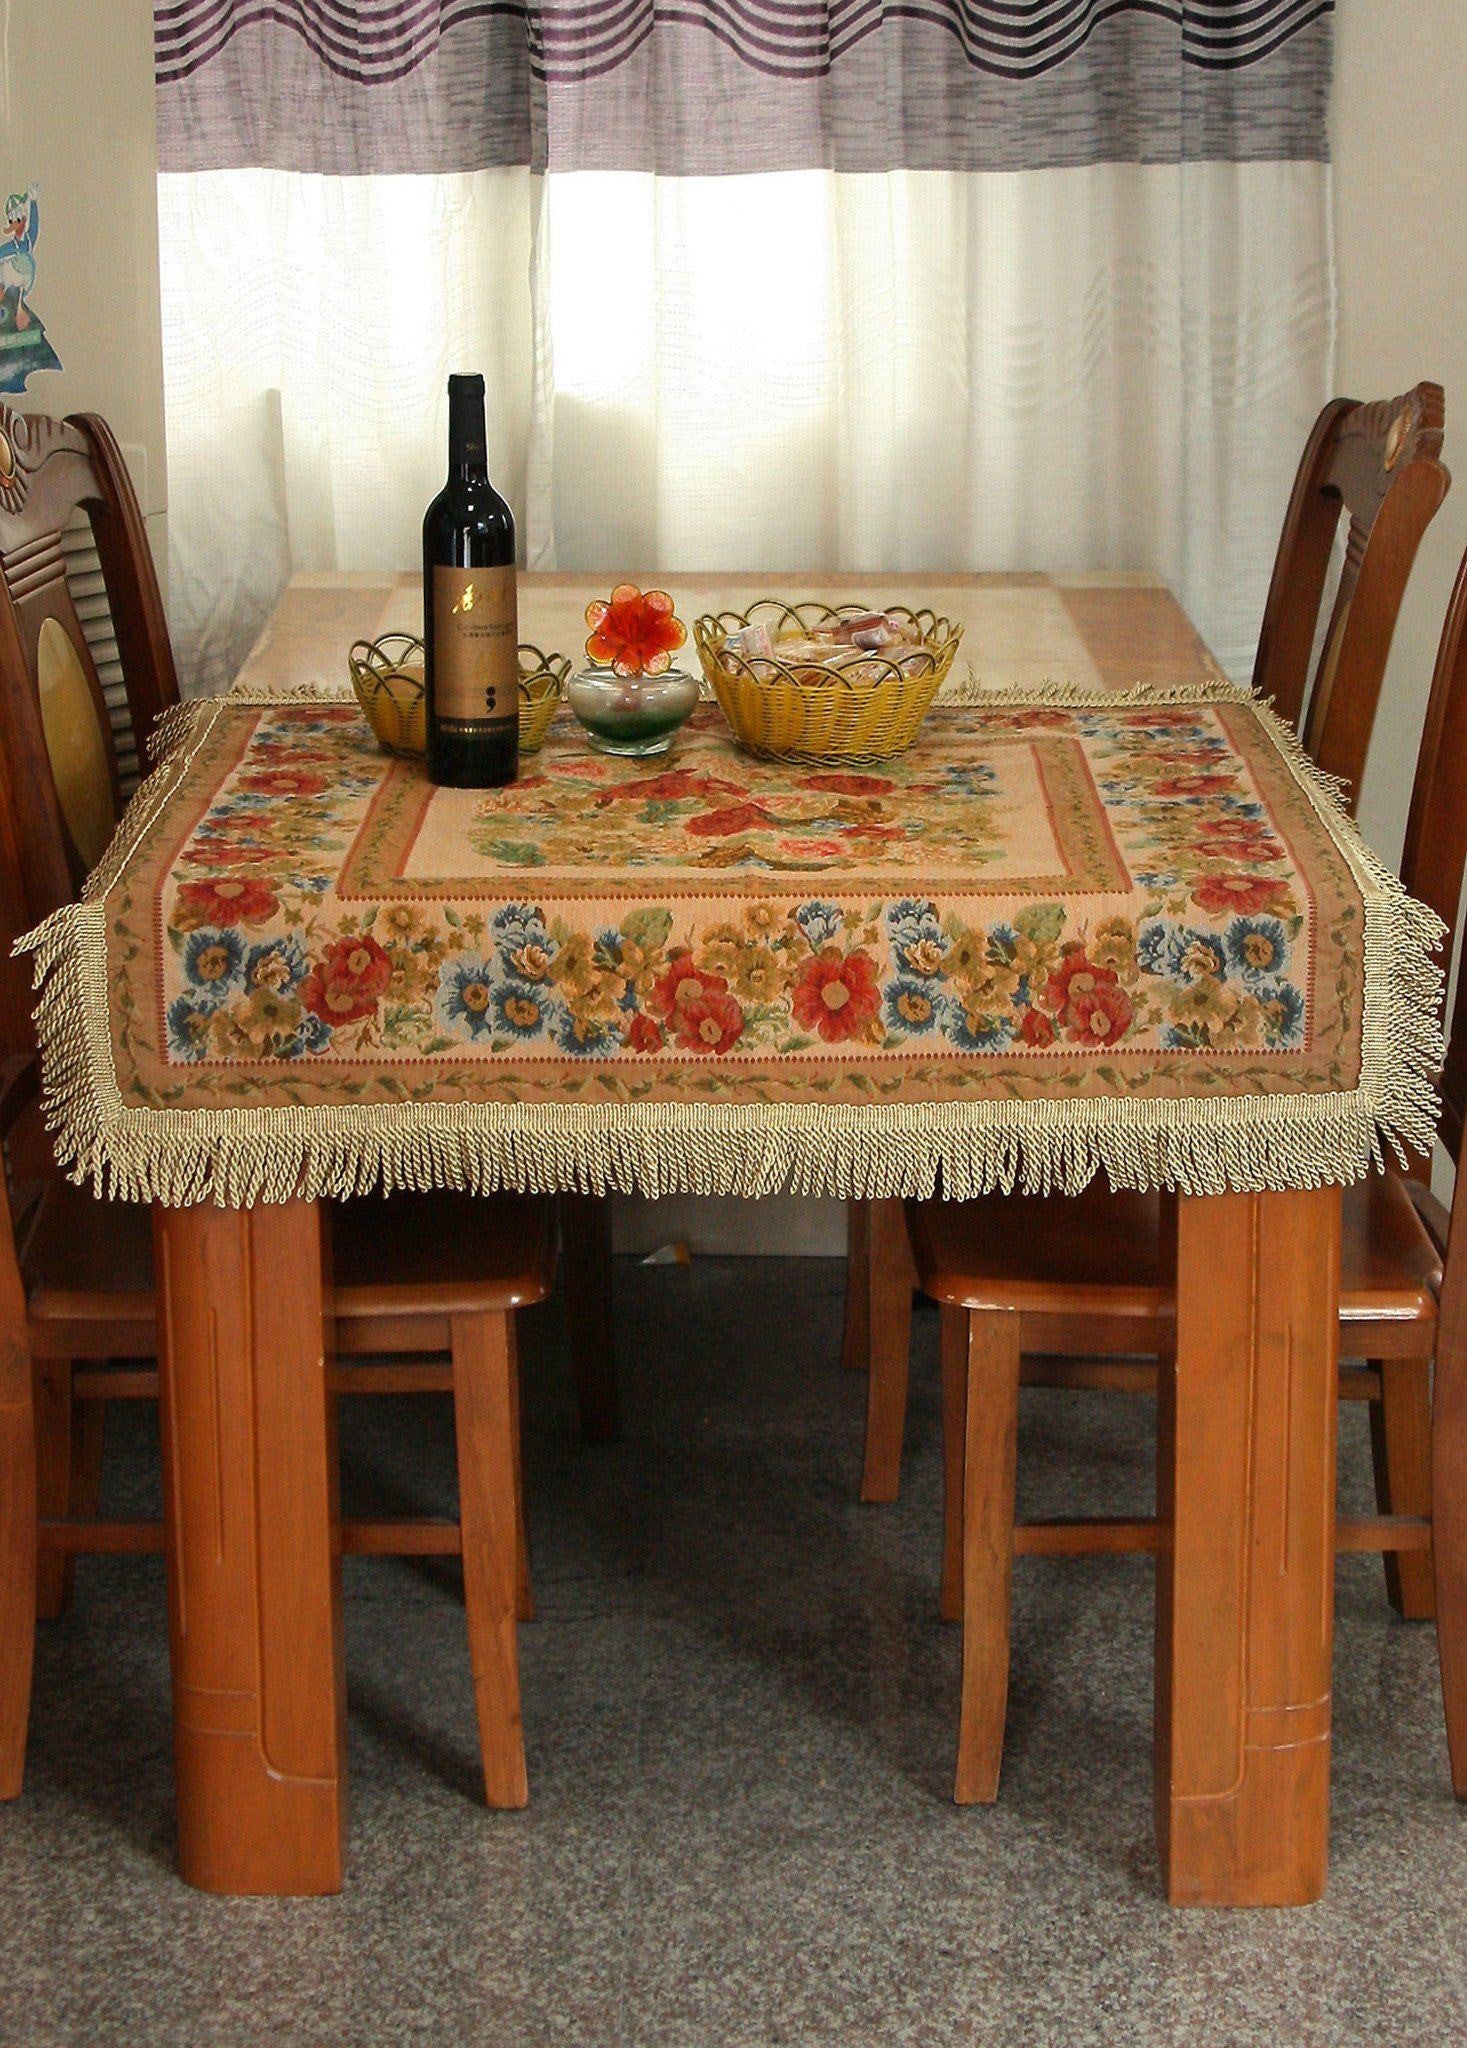 Tache Colorful Floral Country Rustic Morning Meadow Tablecloths (3098) - Tache Home Fashion